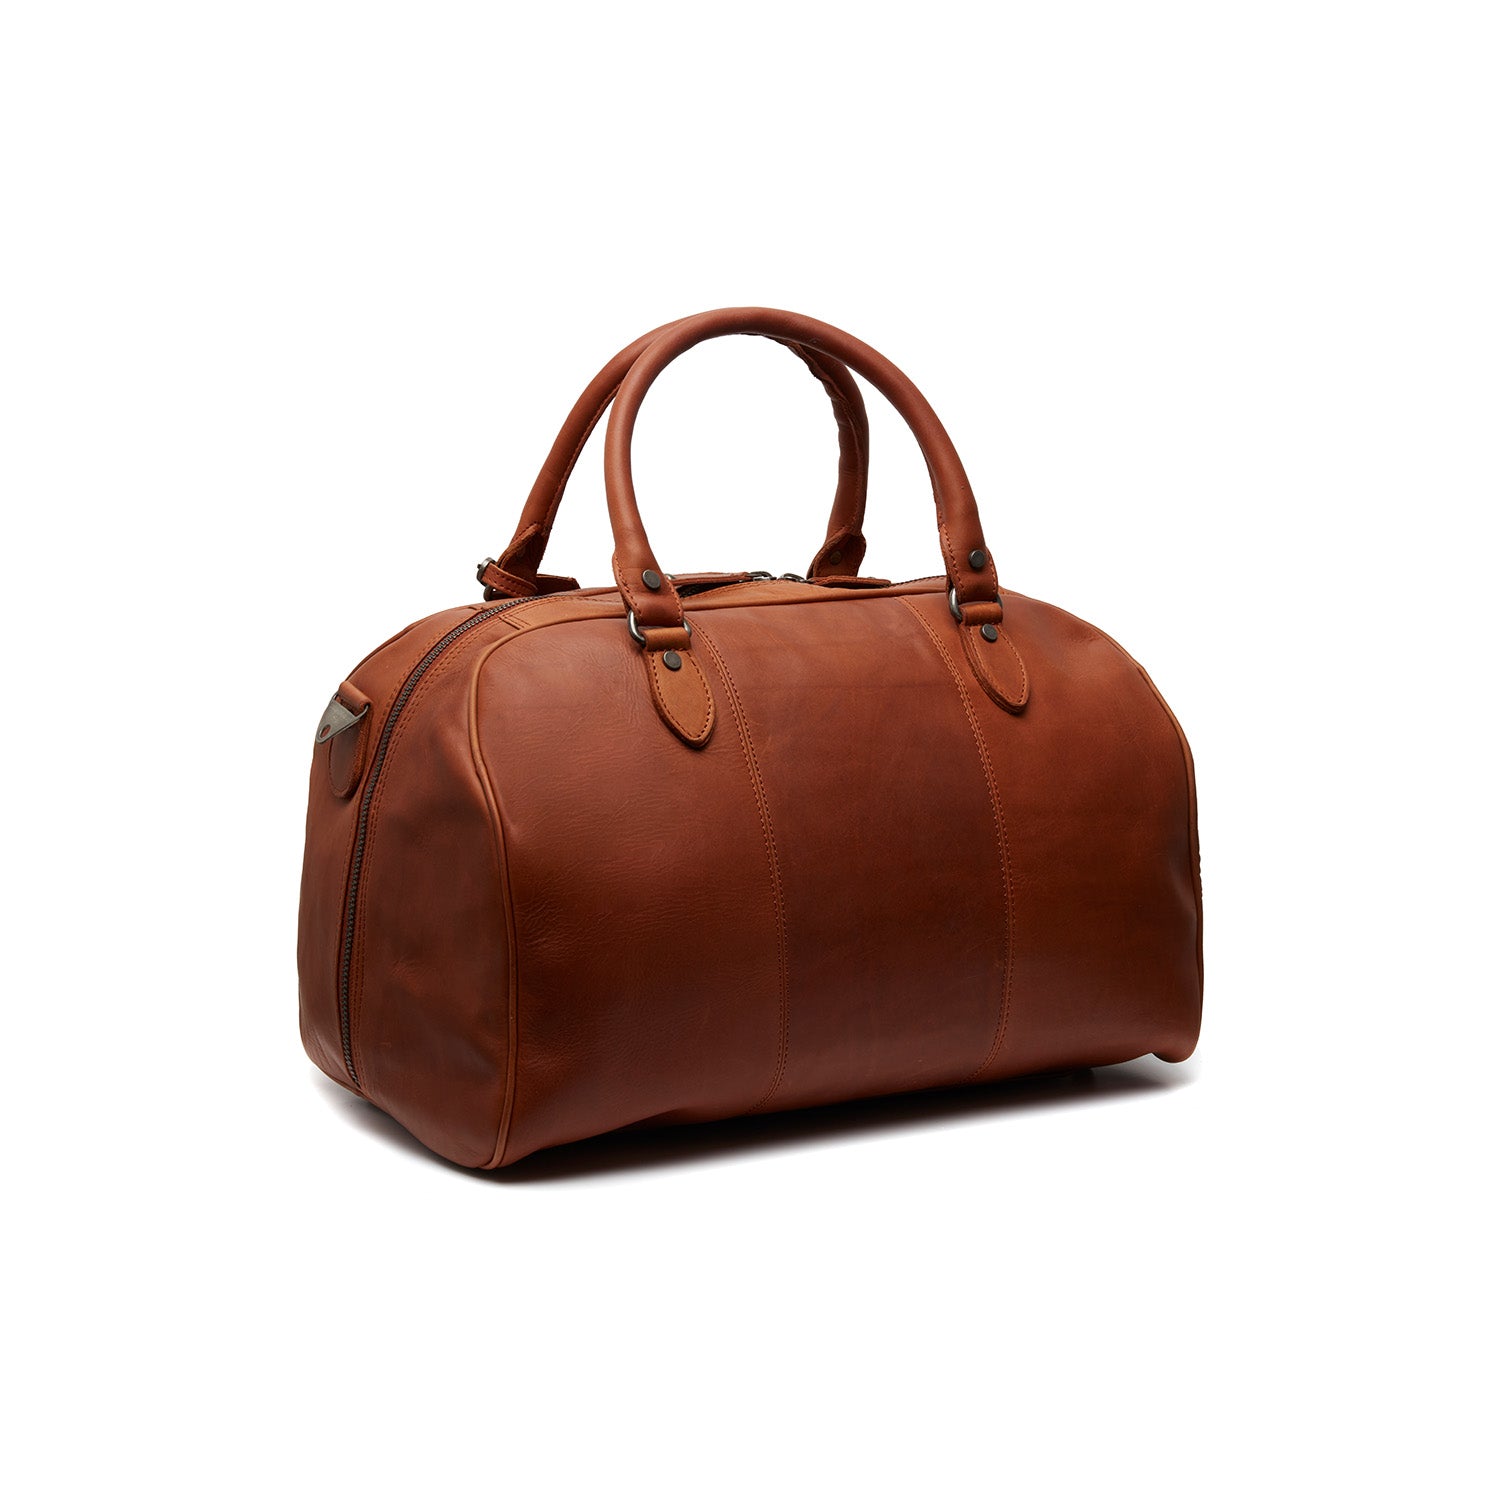 Leather Weekend Bag - The Chesterfield Brand Liam Cognac